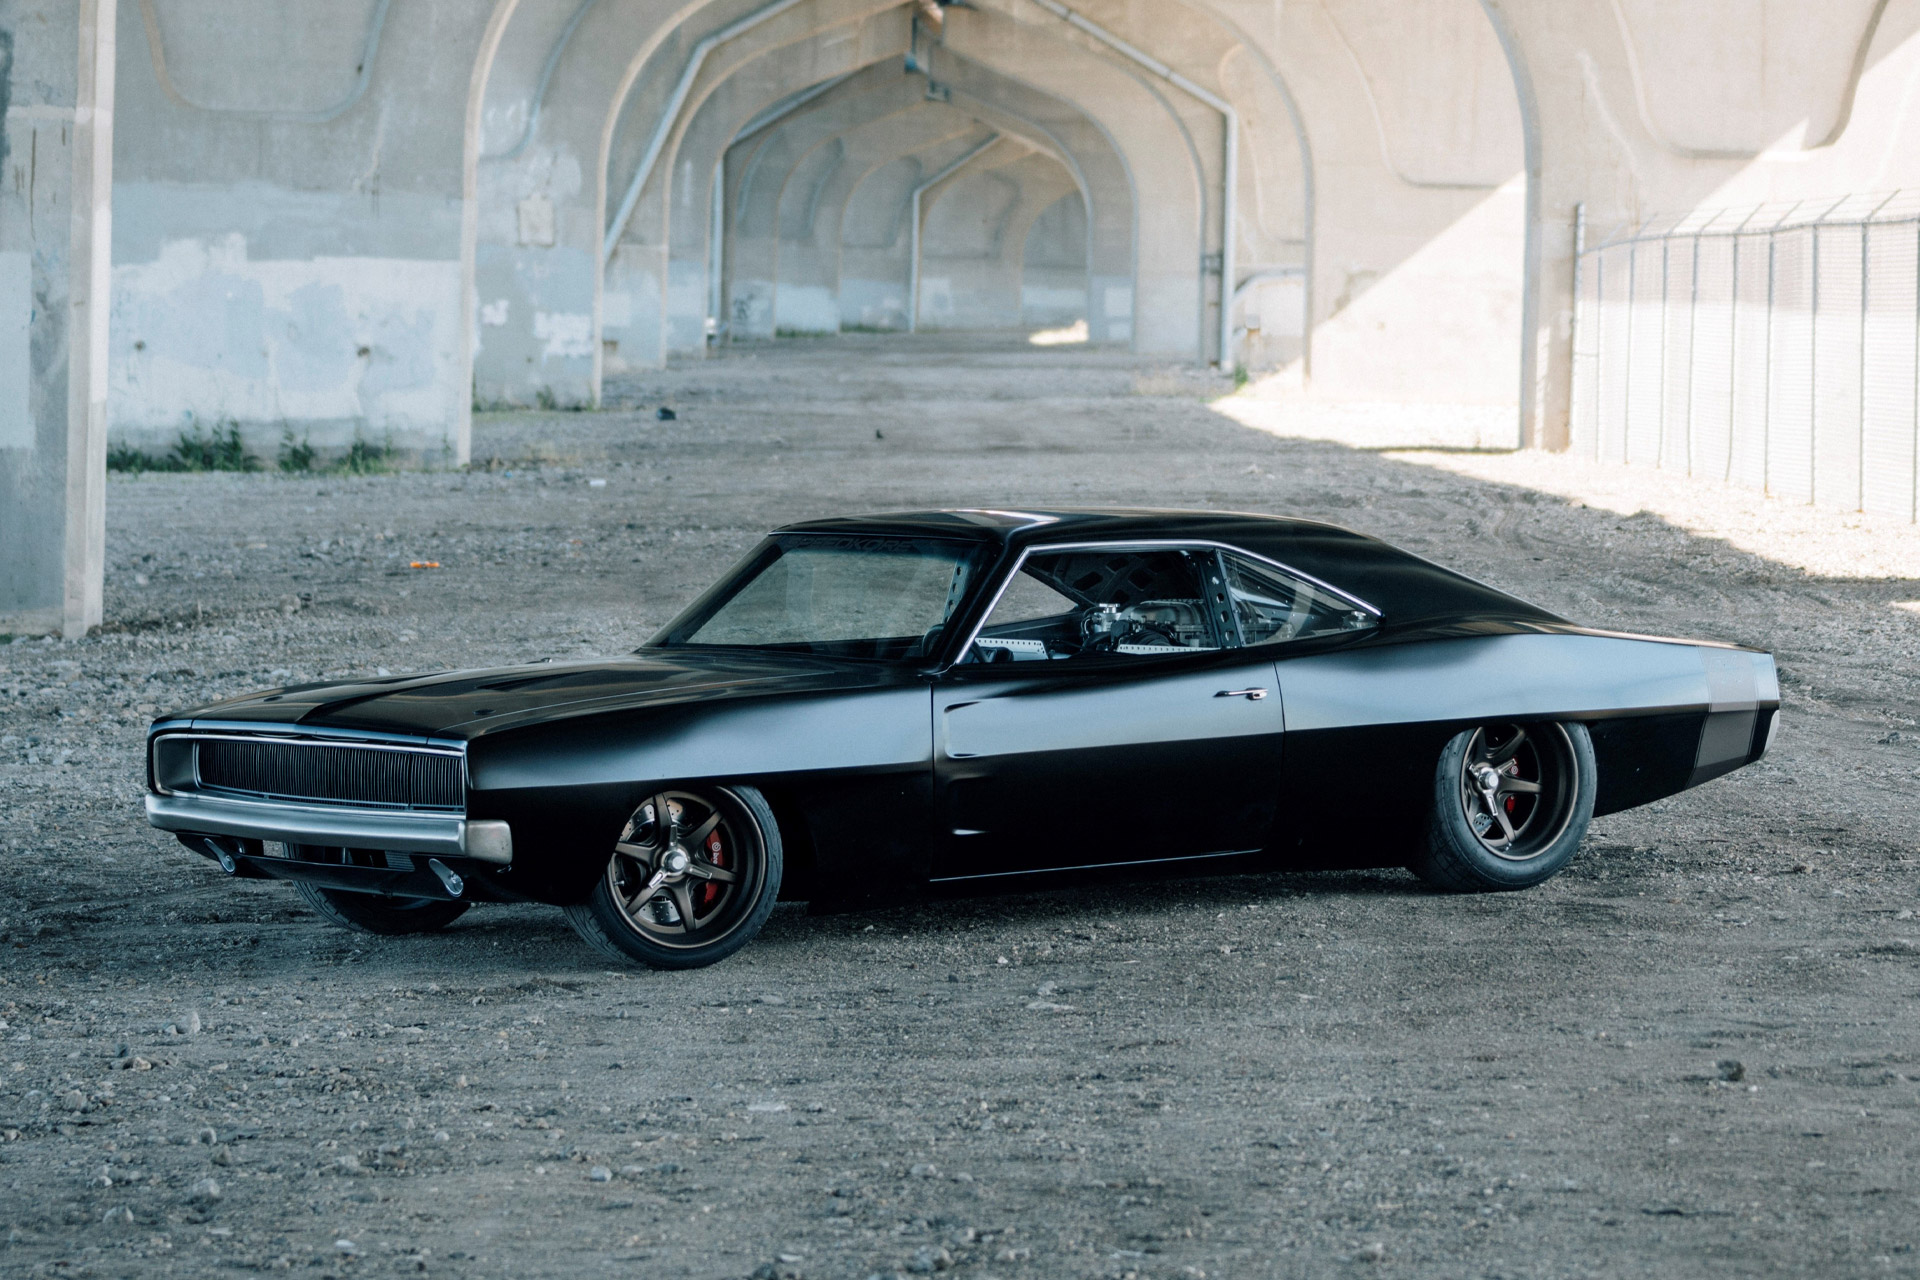 SpeedKore Hellacious F9 1968 Dodge Charger